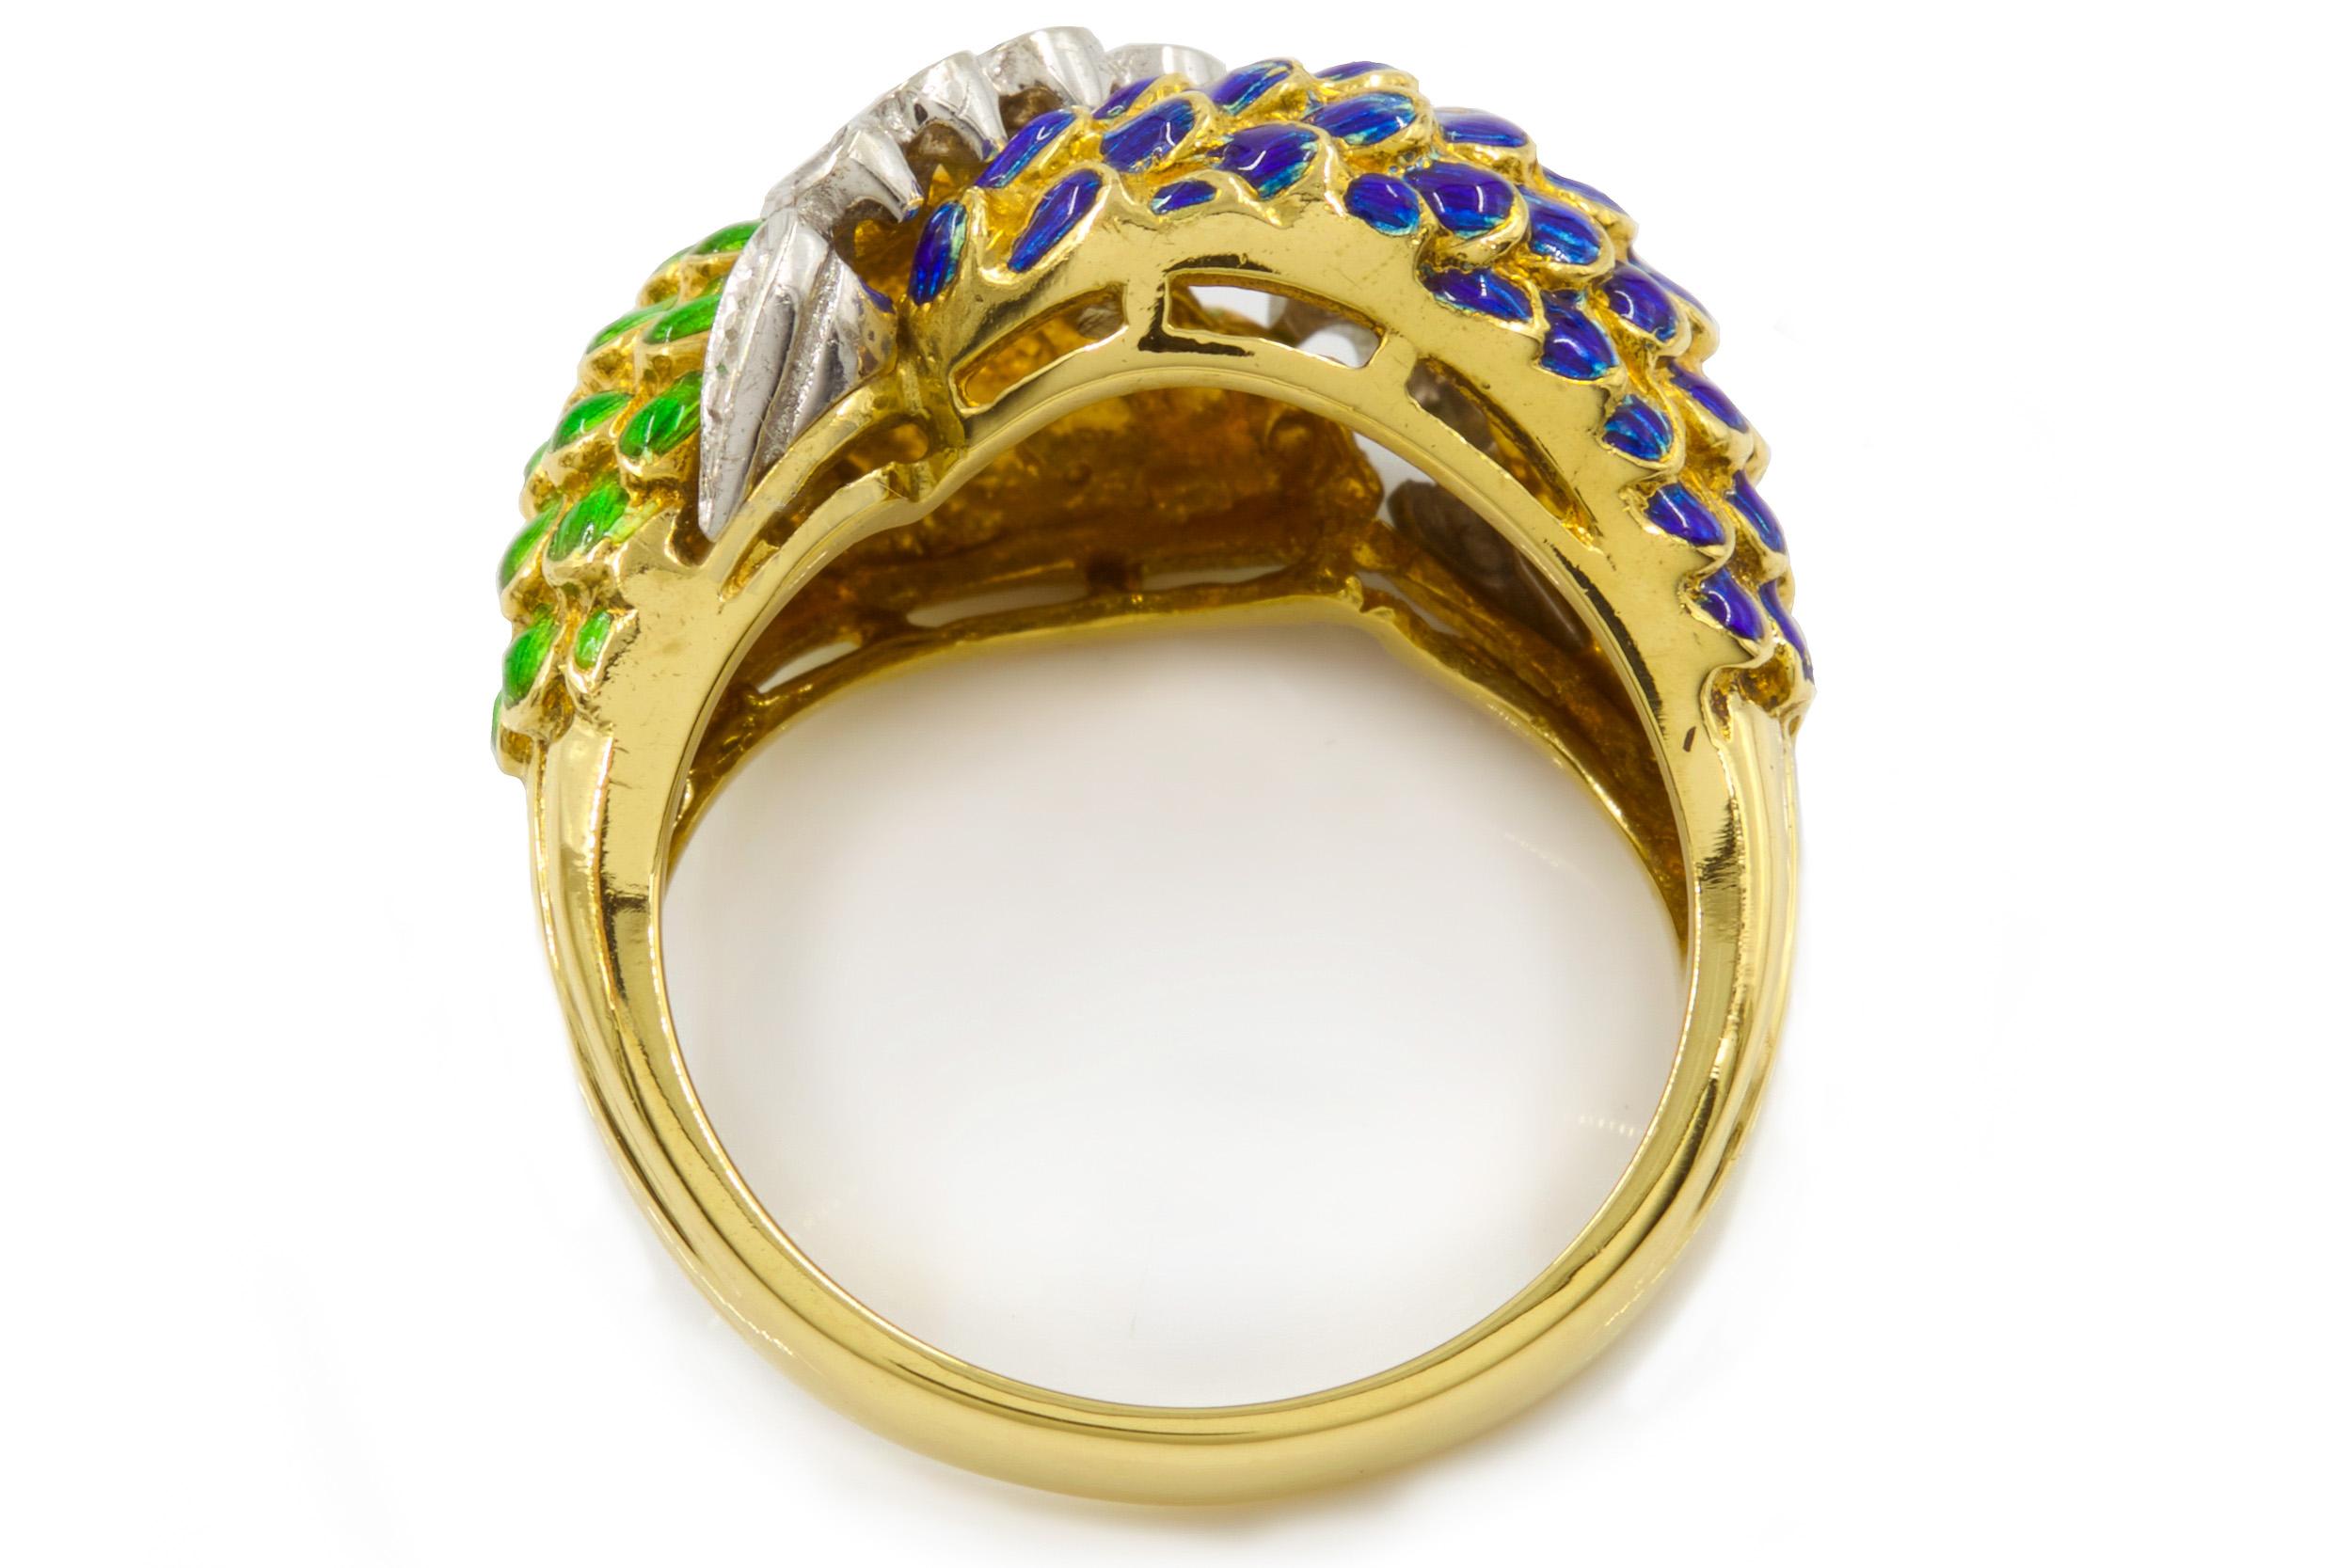 Vintage 18k Gold and Diamond Ring with Blue & Green Enamel For Sale 3